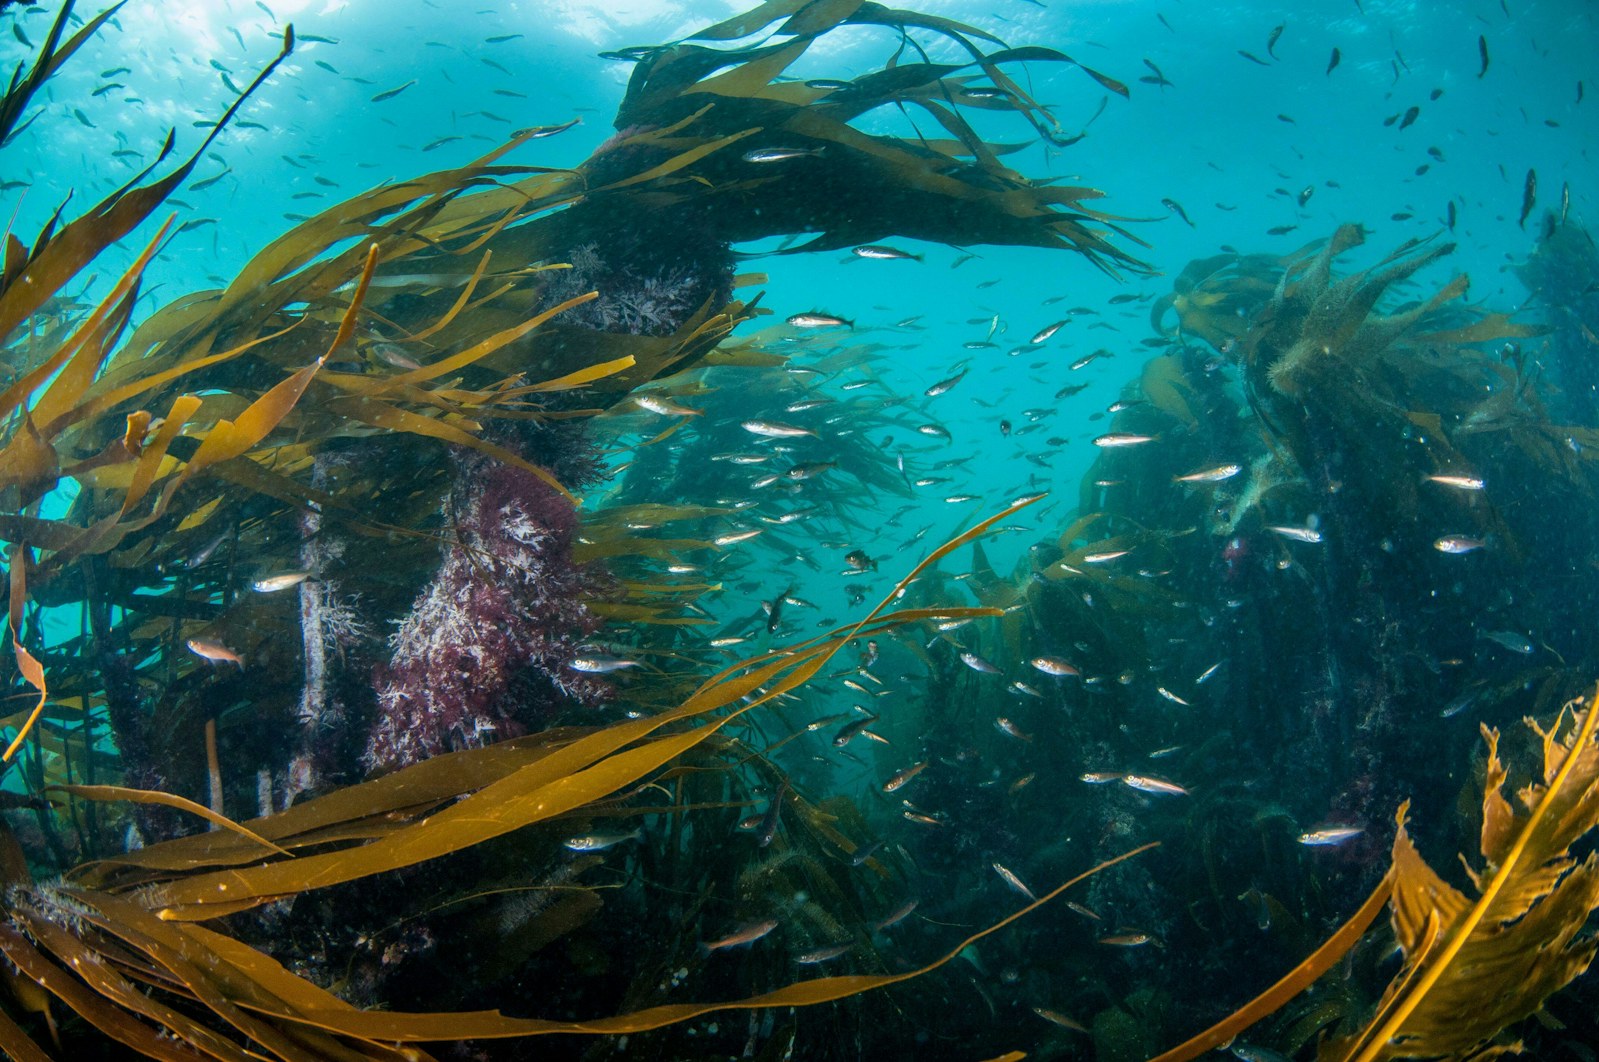 Kelp forest with small fish, Shetland, Scotland